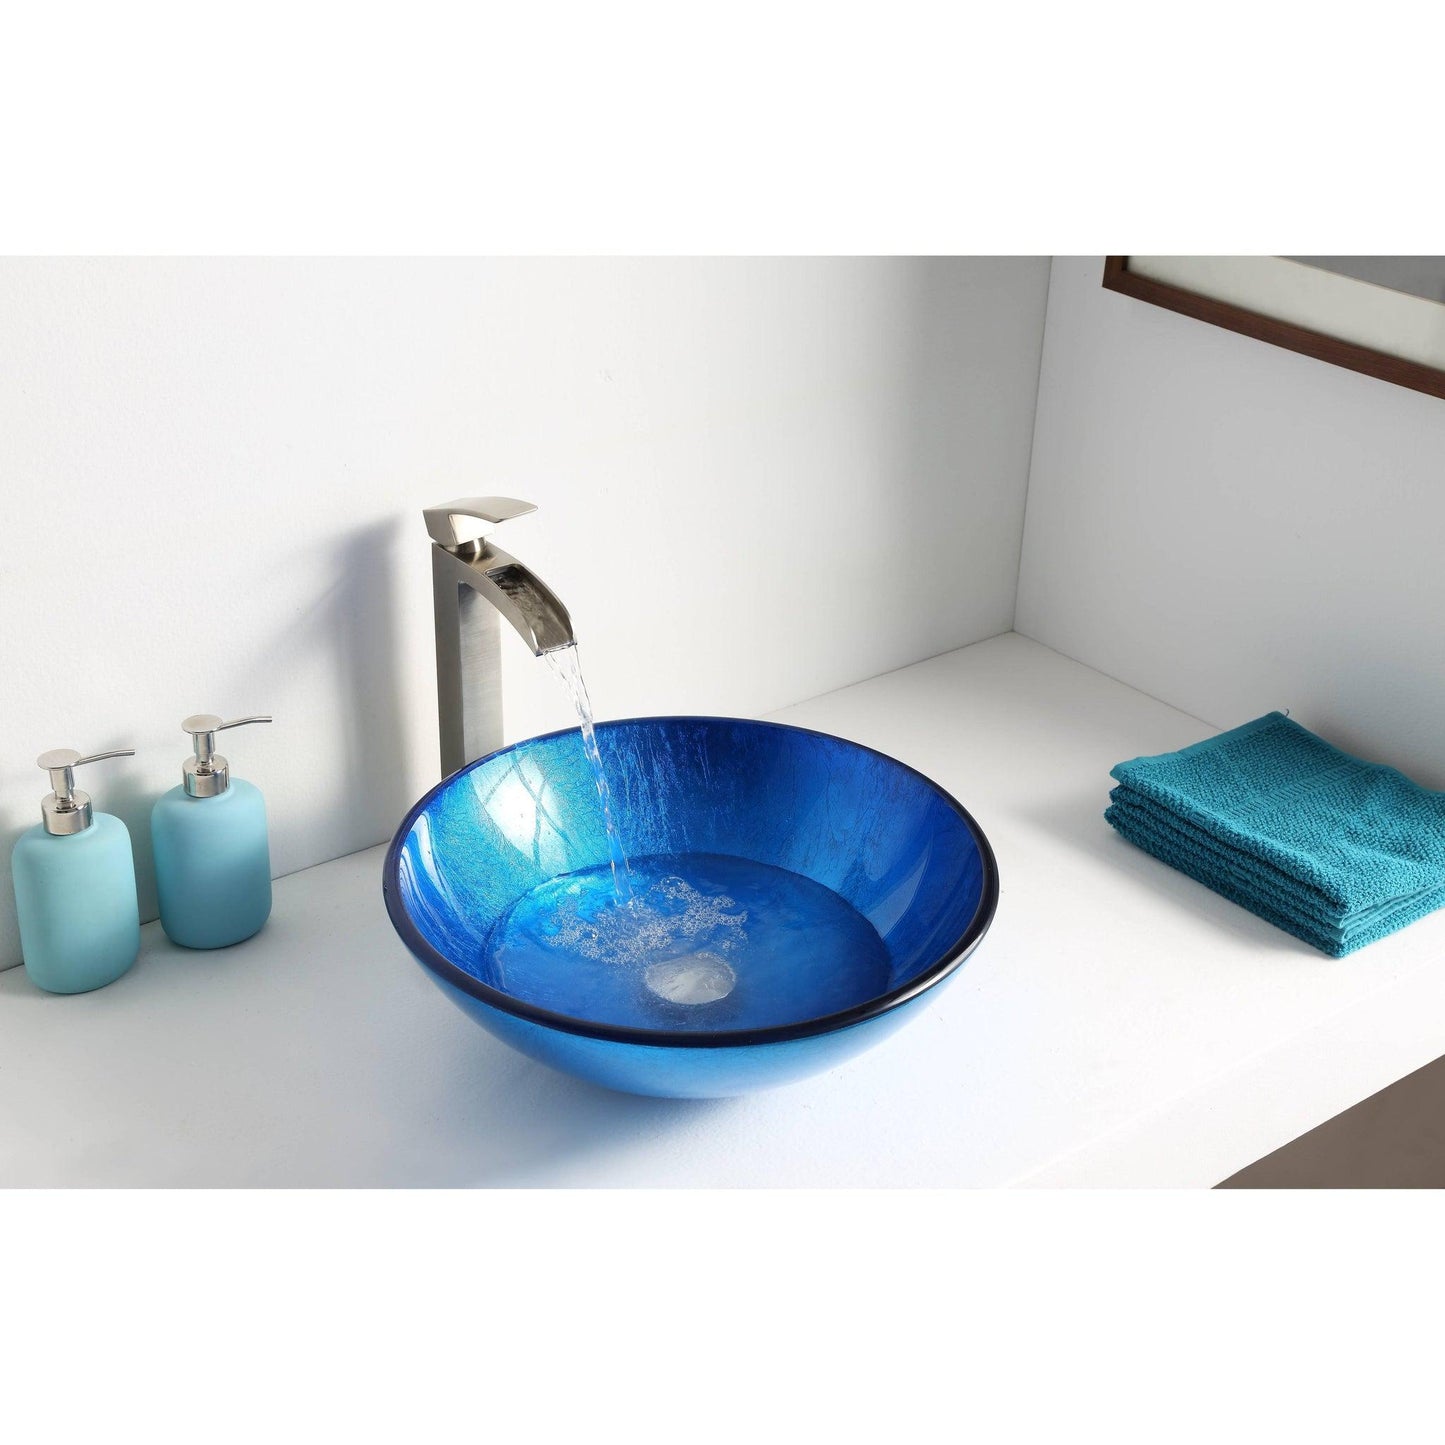 ANZZI Crow Series 17" x 17" Round Lustrous Blue Deco-Glass Vessel Sink With Polished Chrome Pop-Up Drain